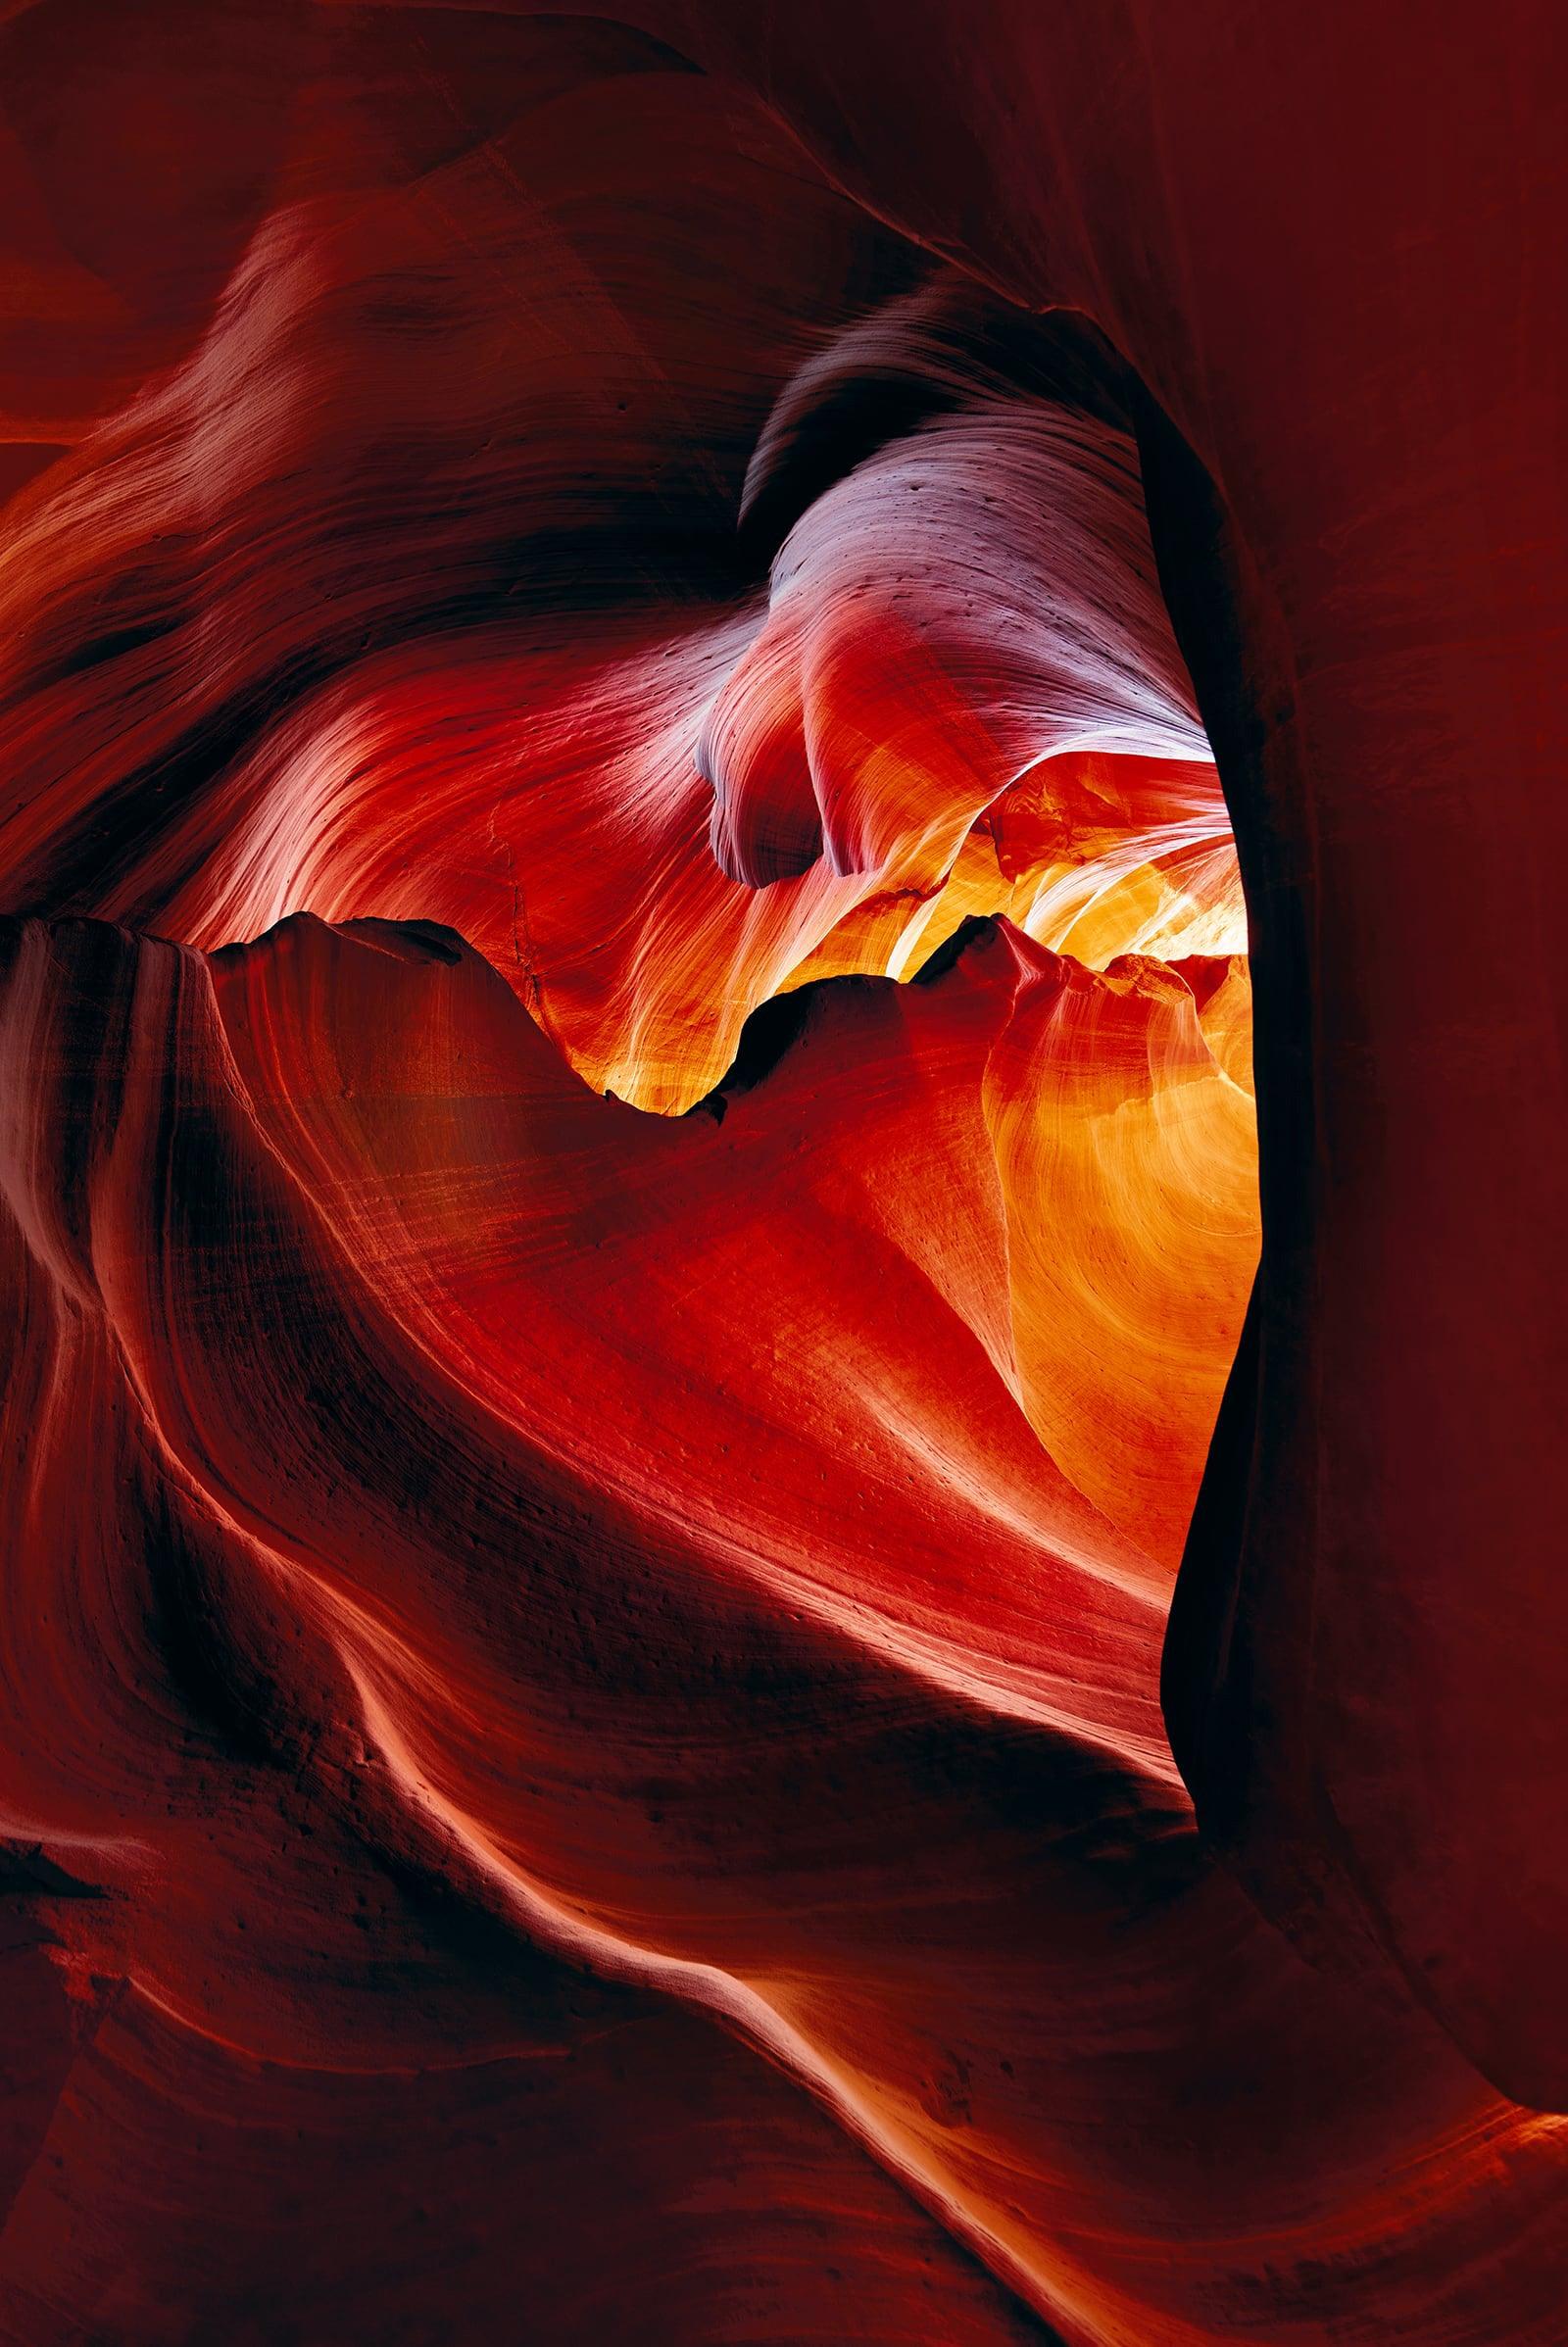 Red and orange heart shaped sandstone cavern within the slot canyons in Antelope Canyon Arizona